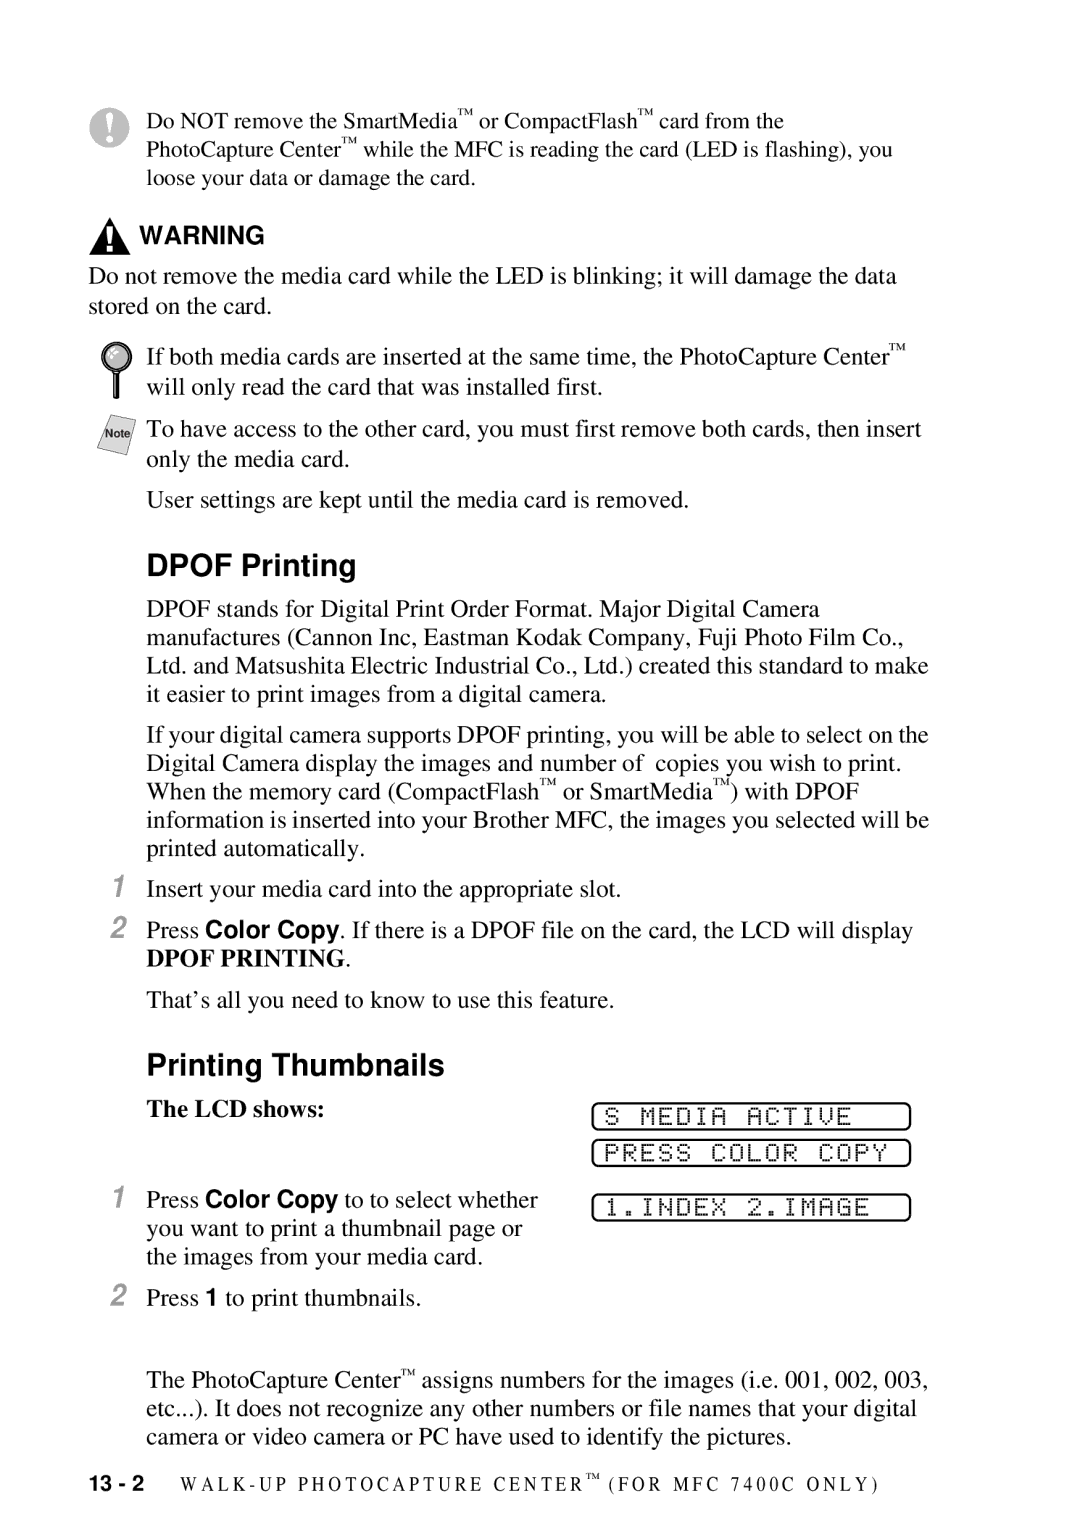 Brother MFC-7300C manual Dpof Printing, Printing Thumbnails, Media Active Press Color Copy Index 2.IMAGE, LCD shows 